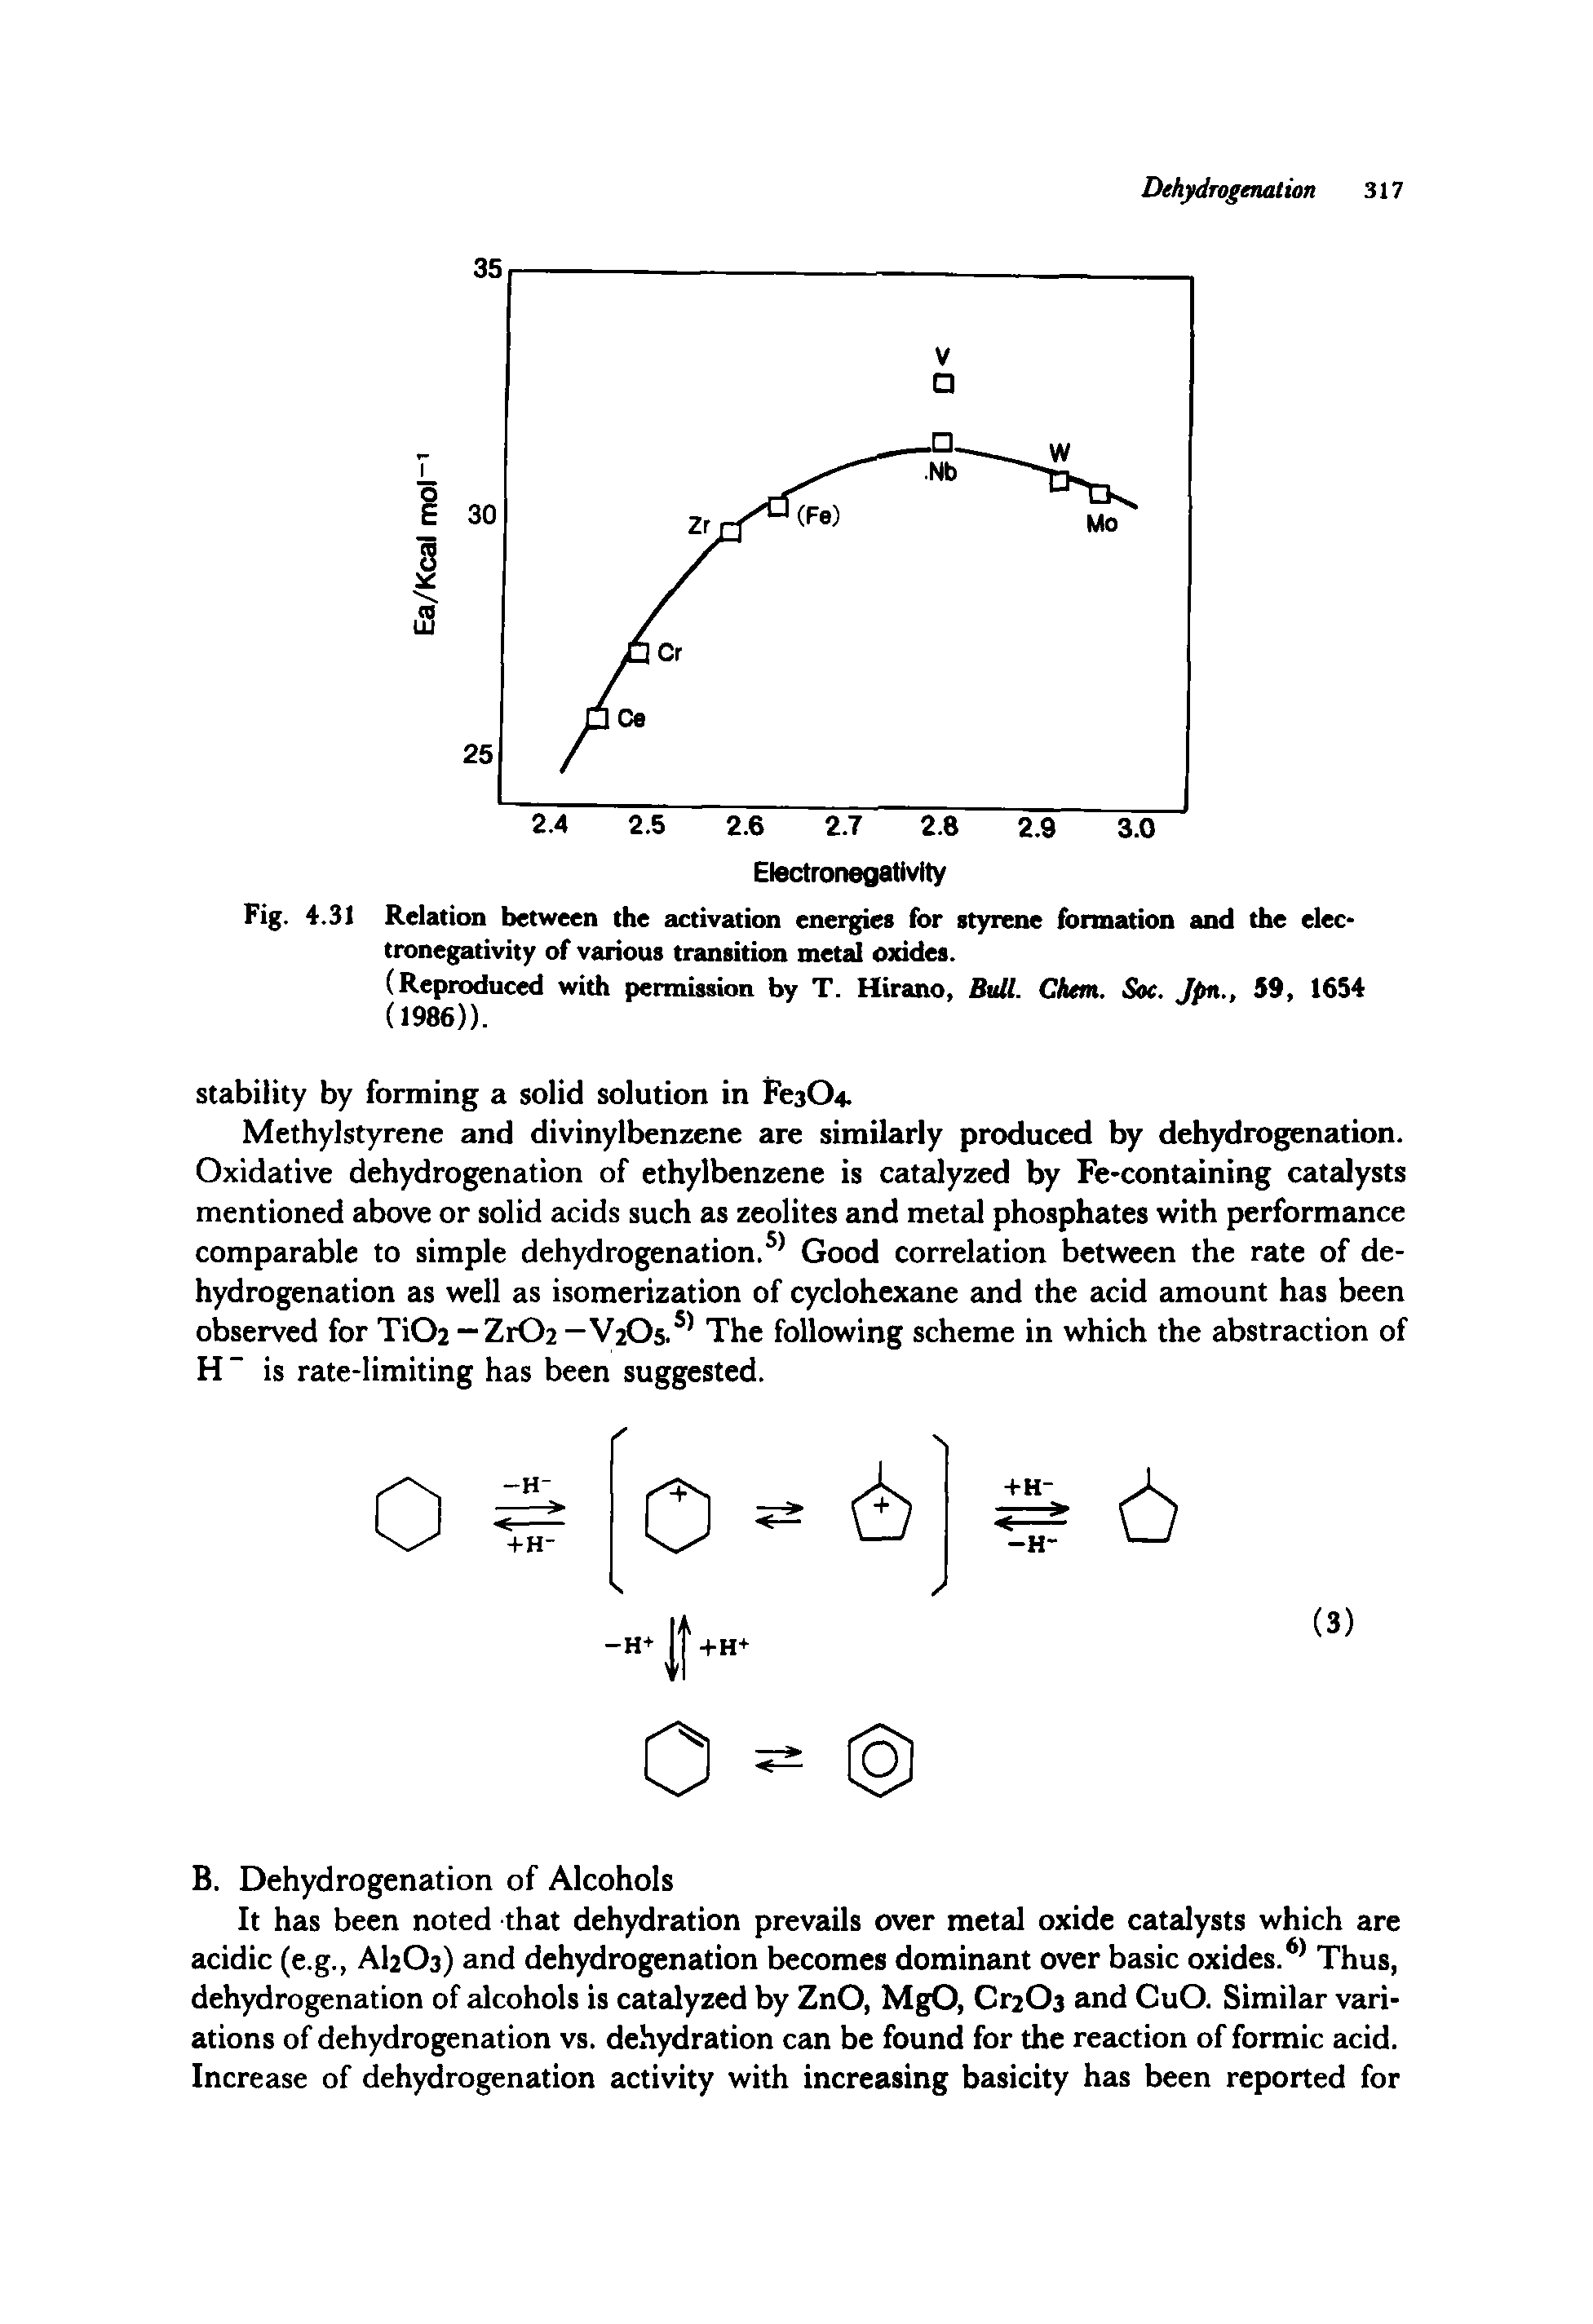 Fig. 4.31 Relation between the activation energies for styrene formation and the electronegativity of various transition metal oxides.